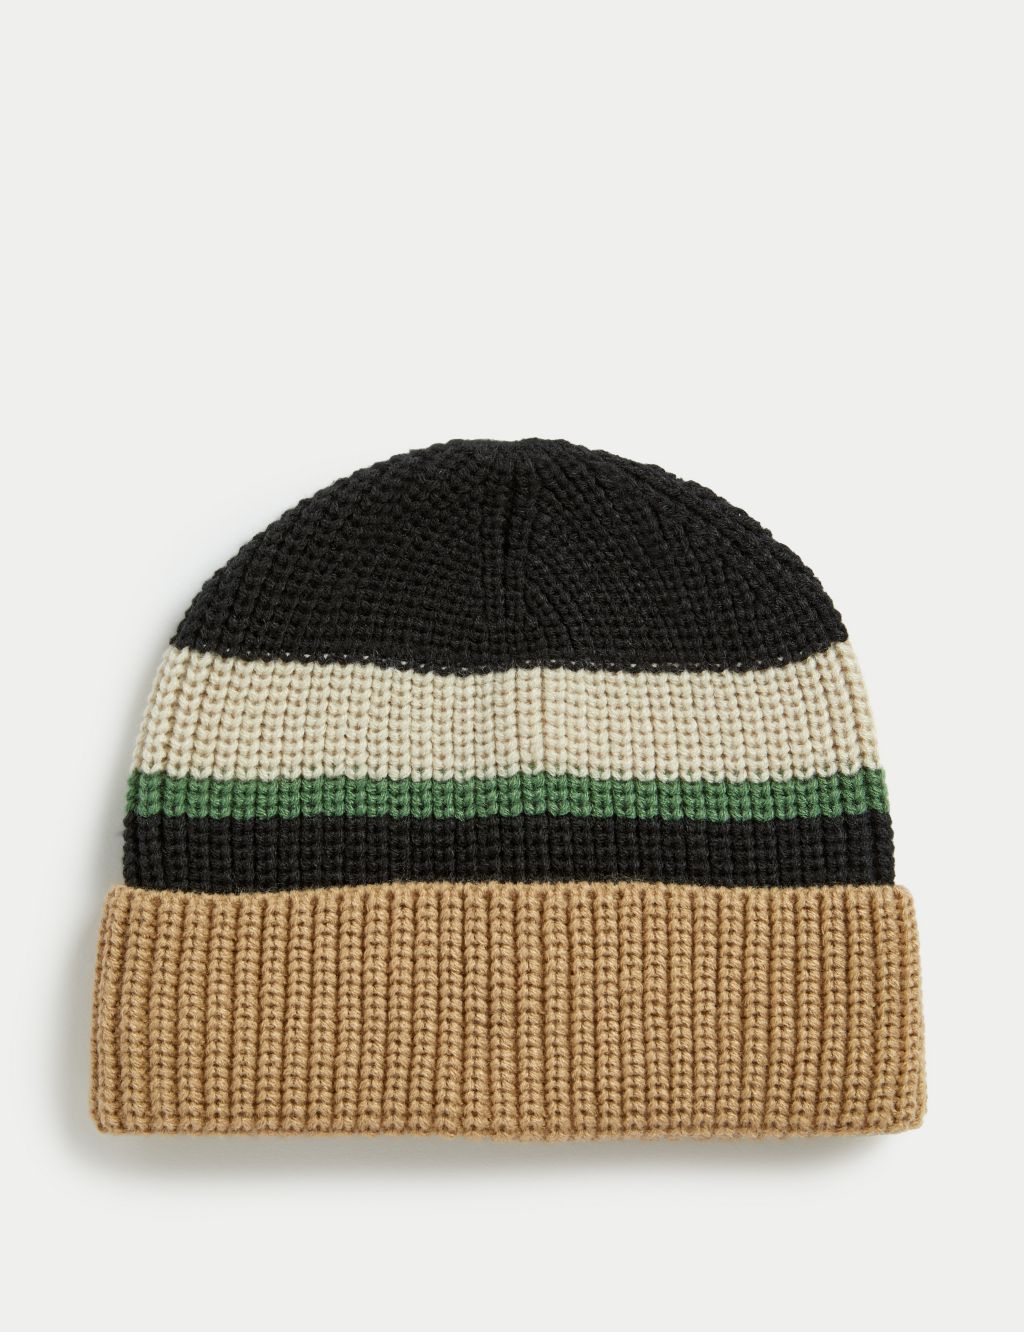 Striped Knitted Beanie Hat